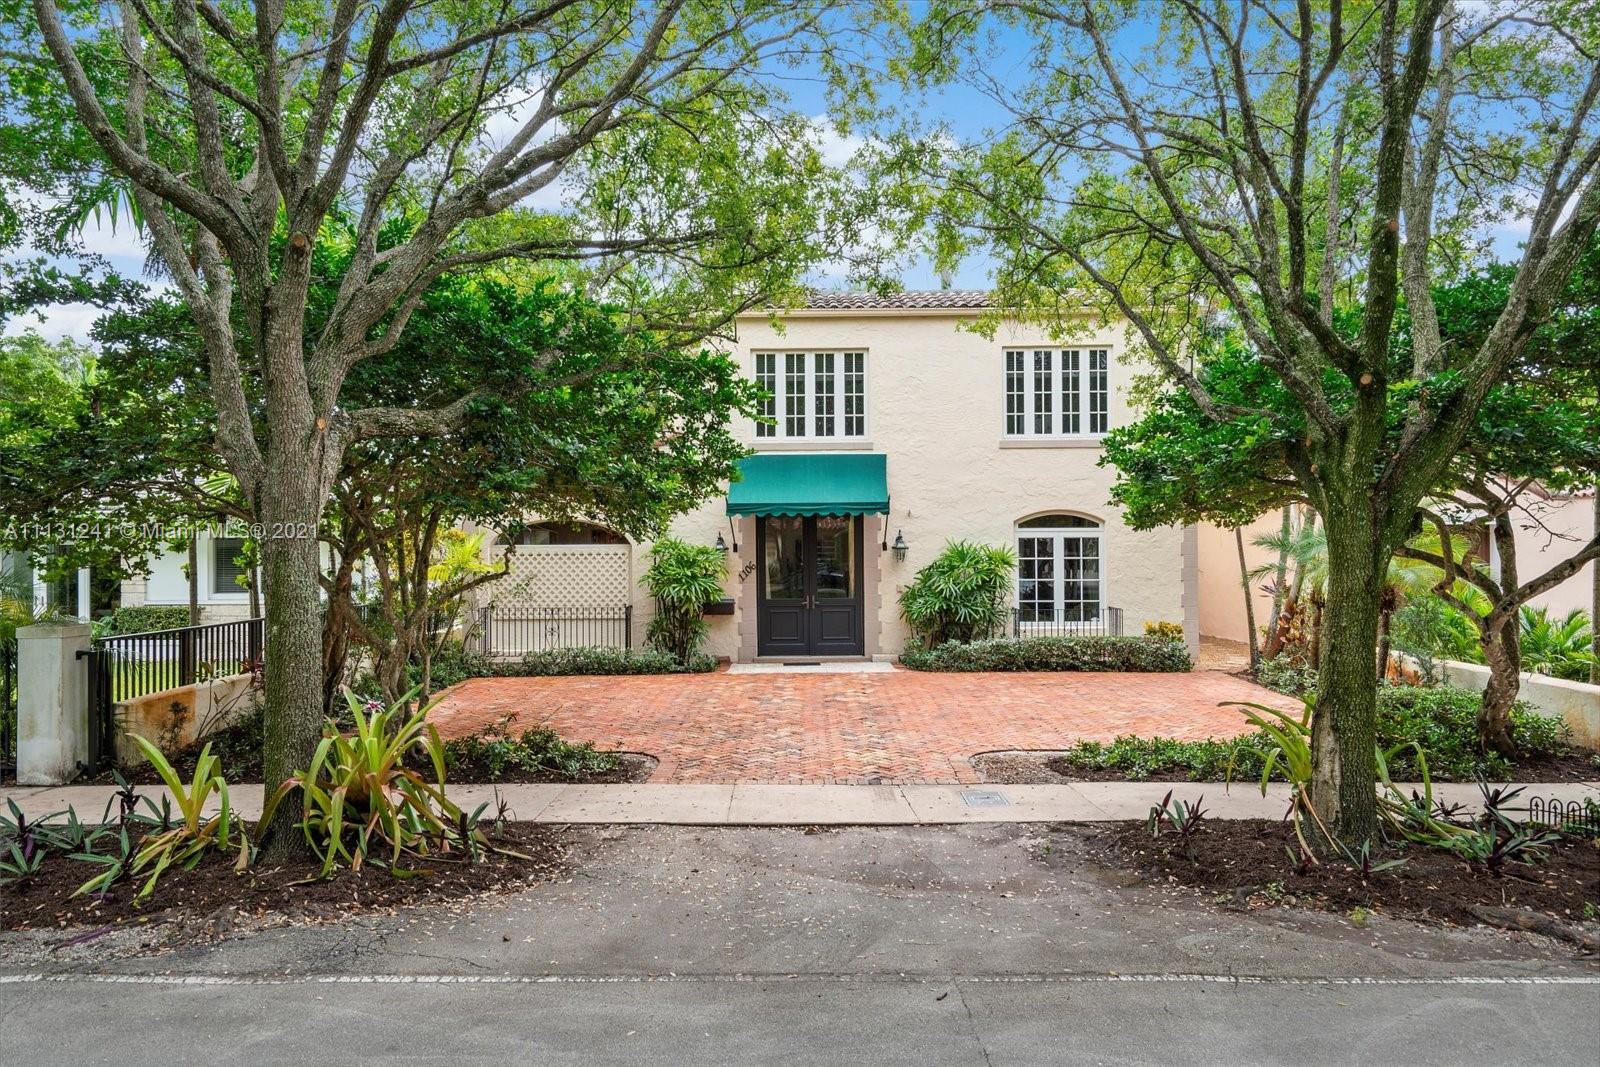 As Florida has continued to be the top destination for personal and business relocation, Coral Gables has confirmed its place as the premier city for living and working in S. Florida. The purchaser of this property will be in the heart of the Gables to enjoy all aspects and amenities. This classic Old Spanish is located on a tree lined street which winds through the Gables with a wide median separating one lane of traffic in each direction. High volume ceilings, open spaces, fireplace, impact windows & doors, central A/C, a large guest house, are a few of the features to enjoy in your new residence. Walk to golf course, tennis courts, parks. Browse through the photos, and make an appointment to confirm that it could be a fit for you.